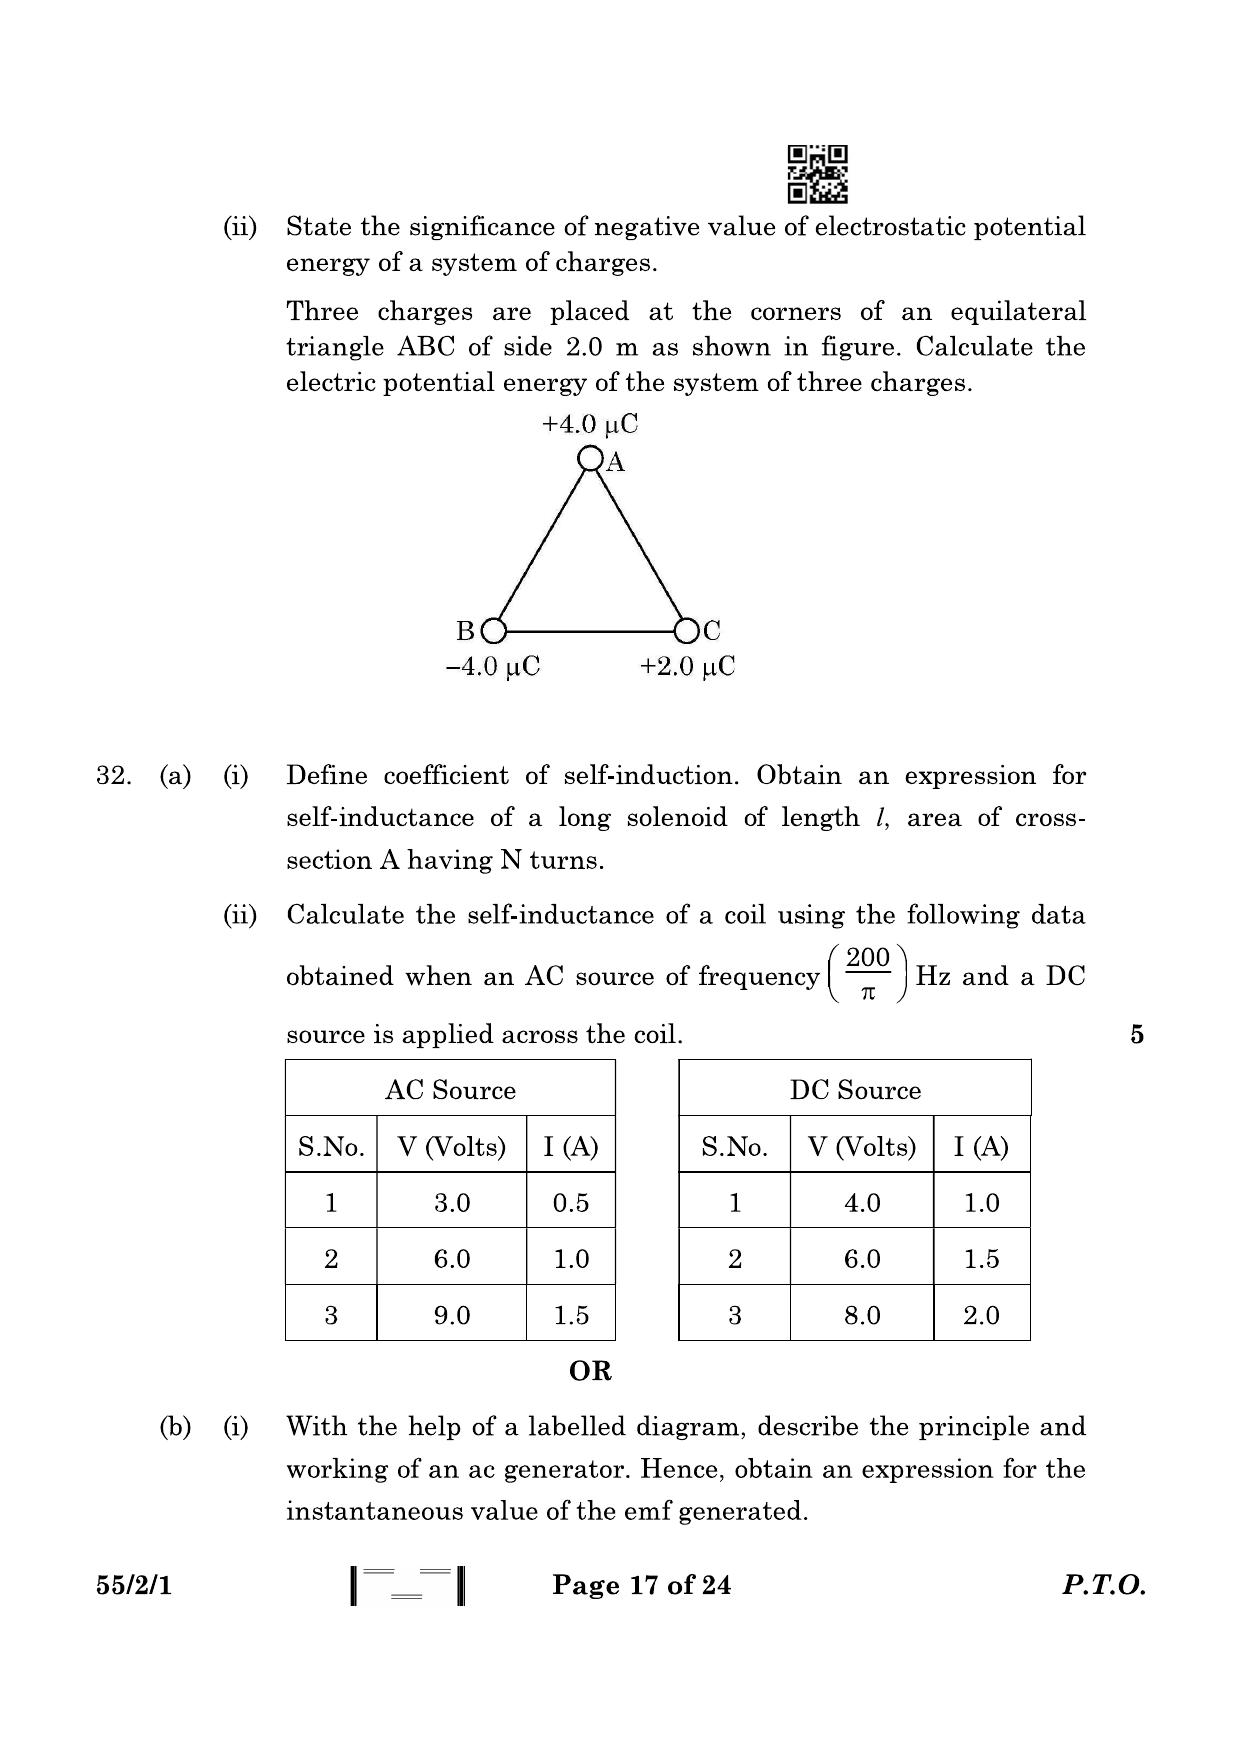 CBSE Class 12 55-2-1 Physics 2023 Question Paper - Page 17